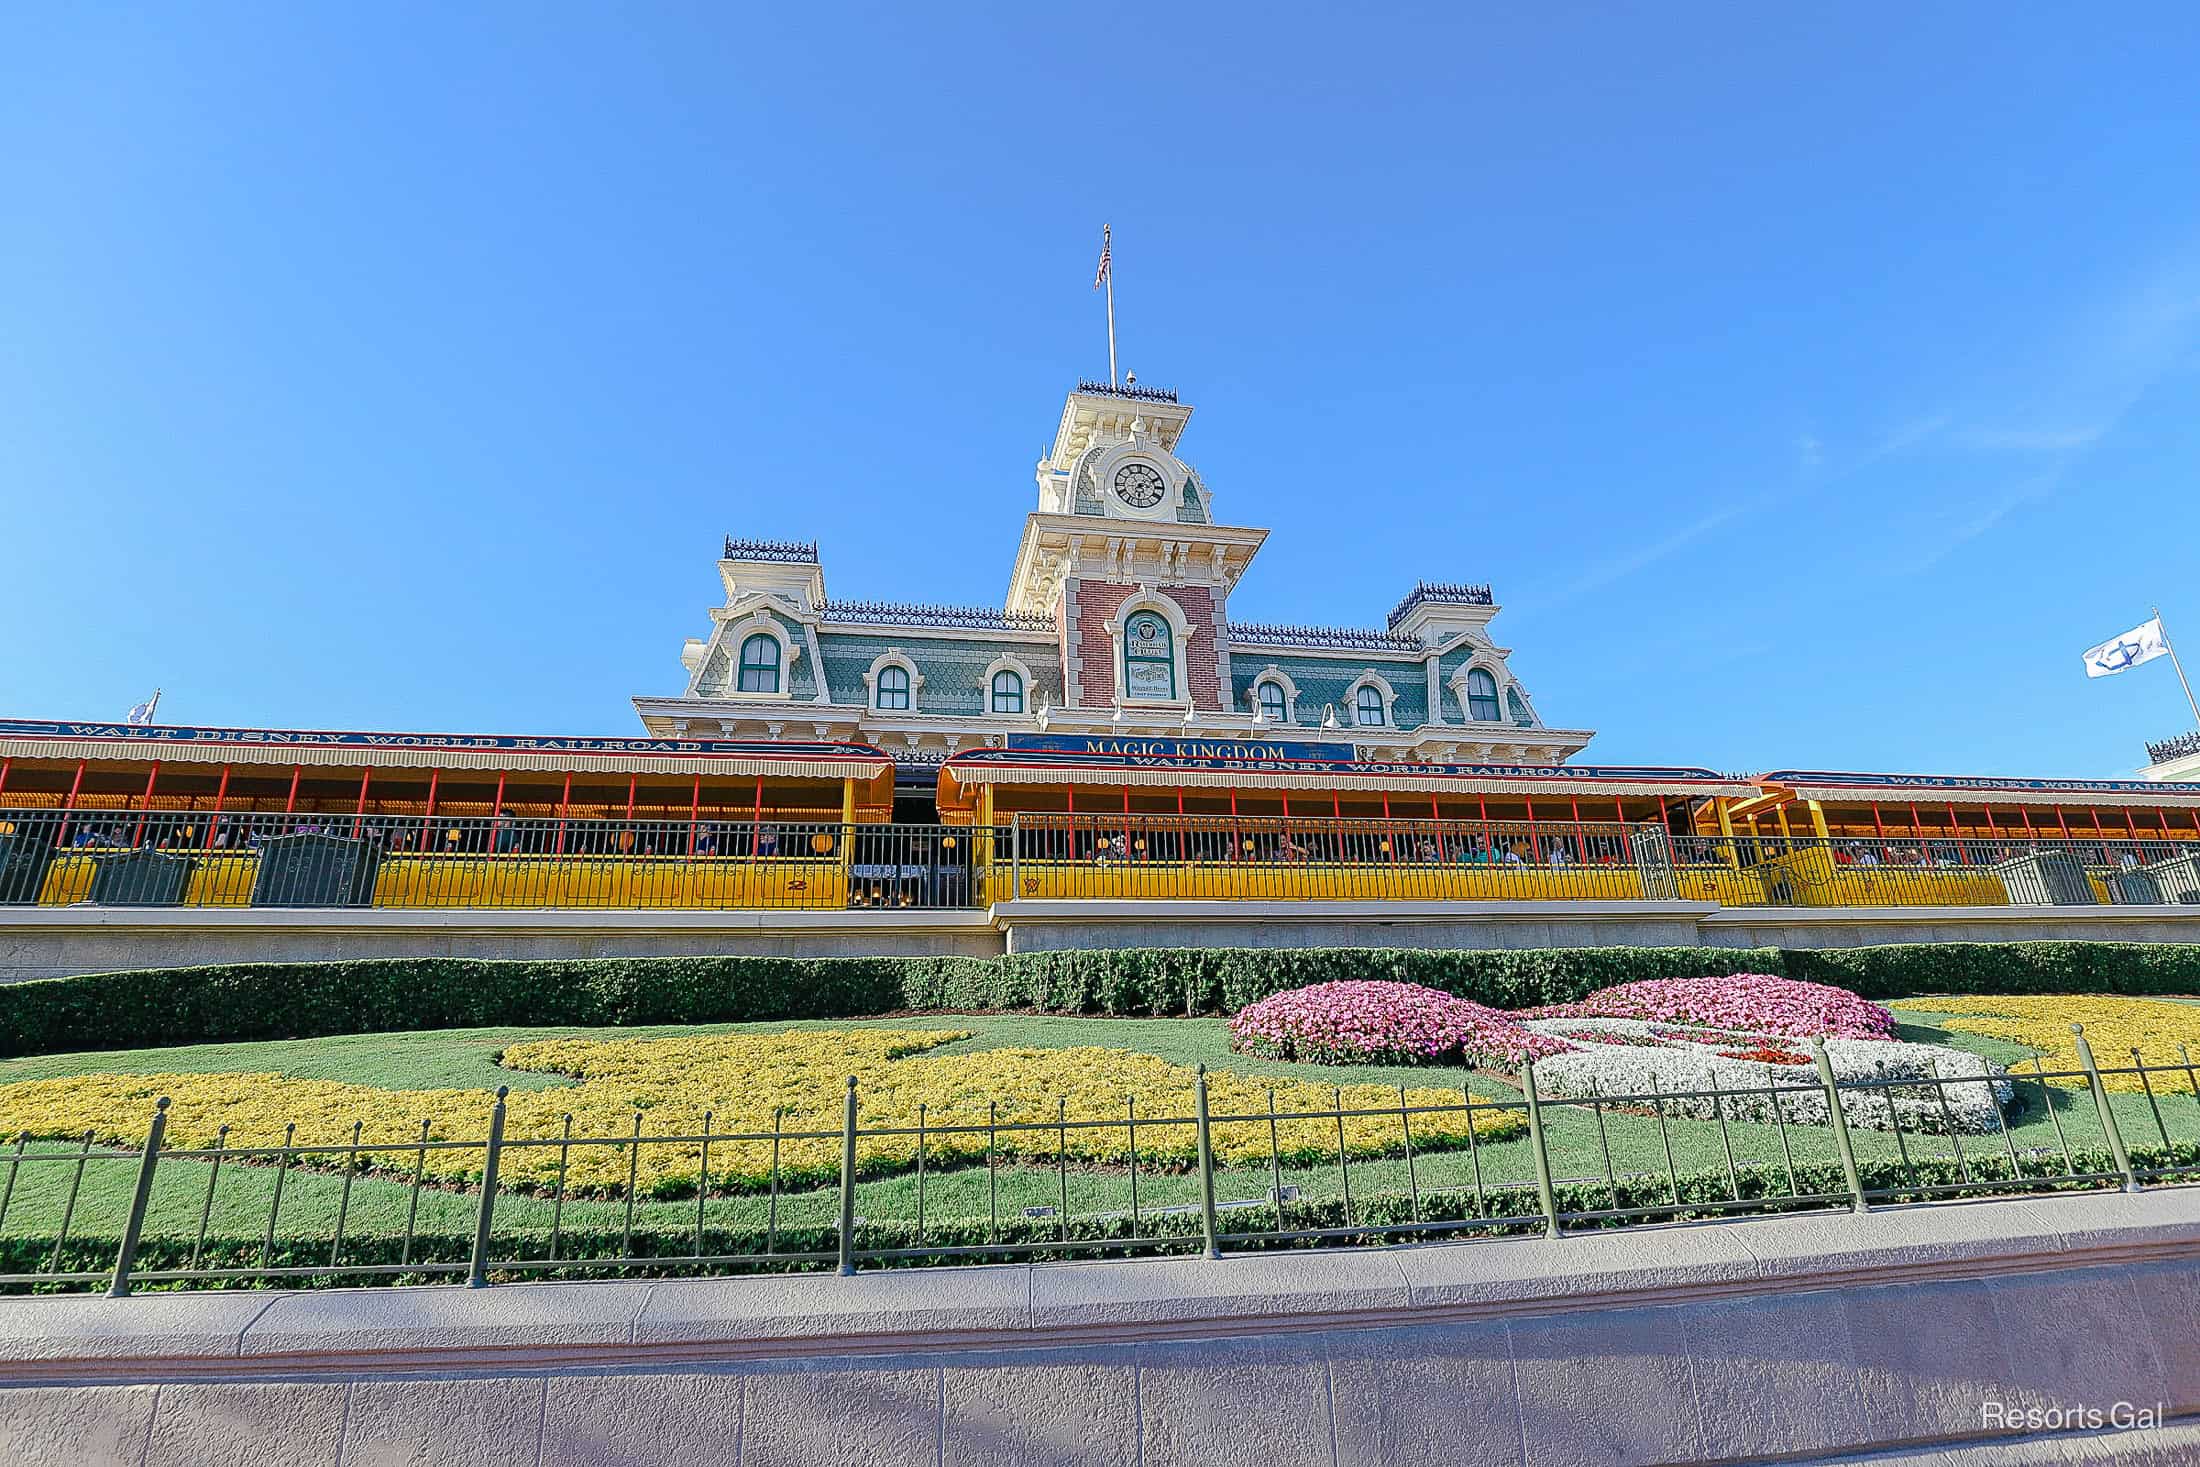 the entrance to Magic Kingdom with the train station in the background and Mickey floral planter 